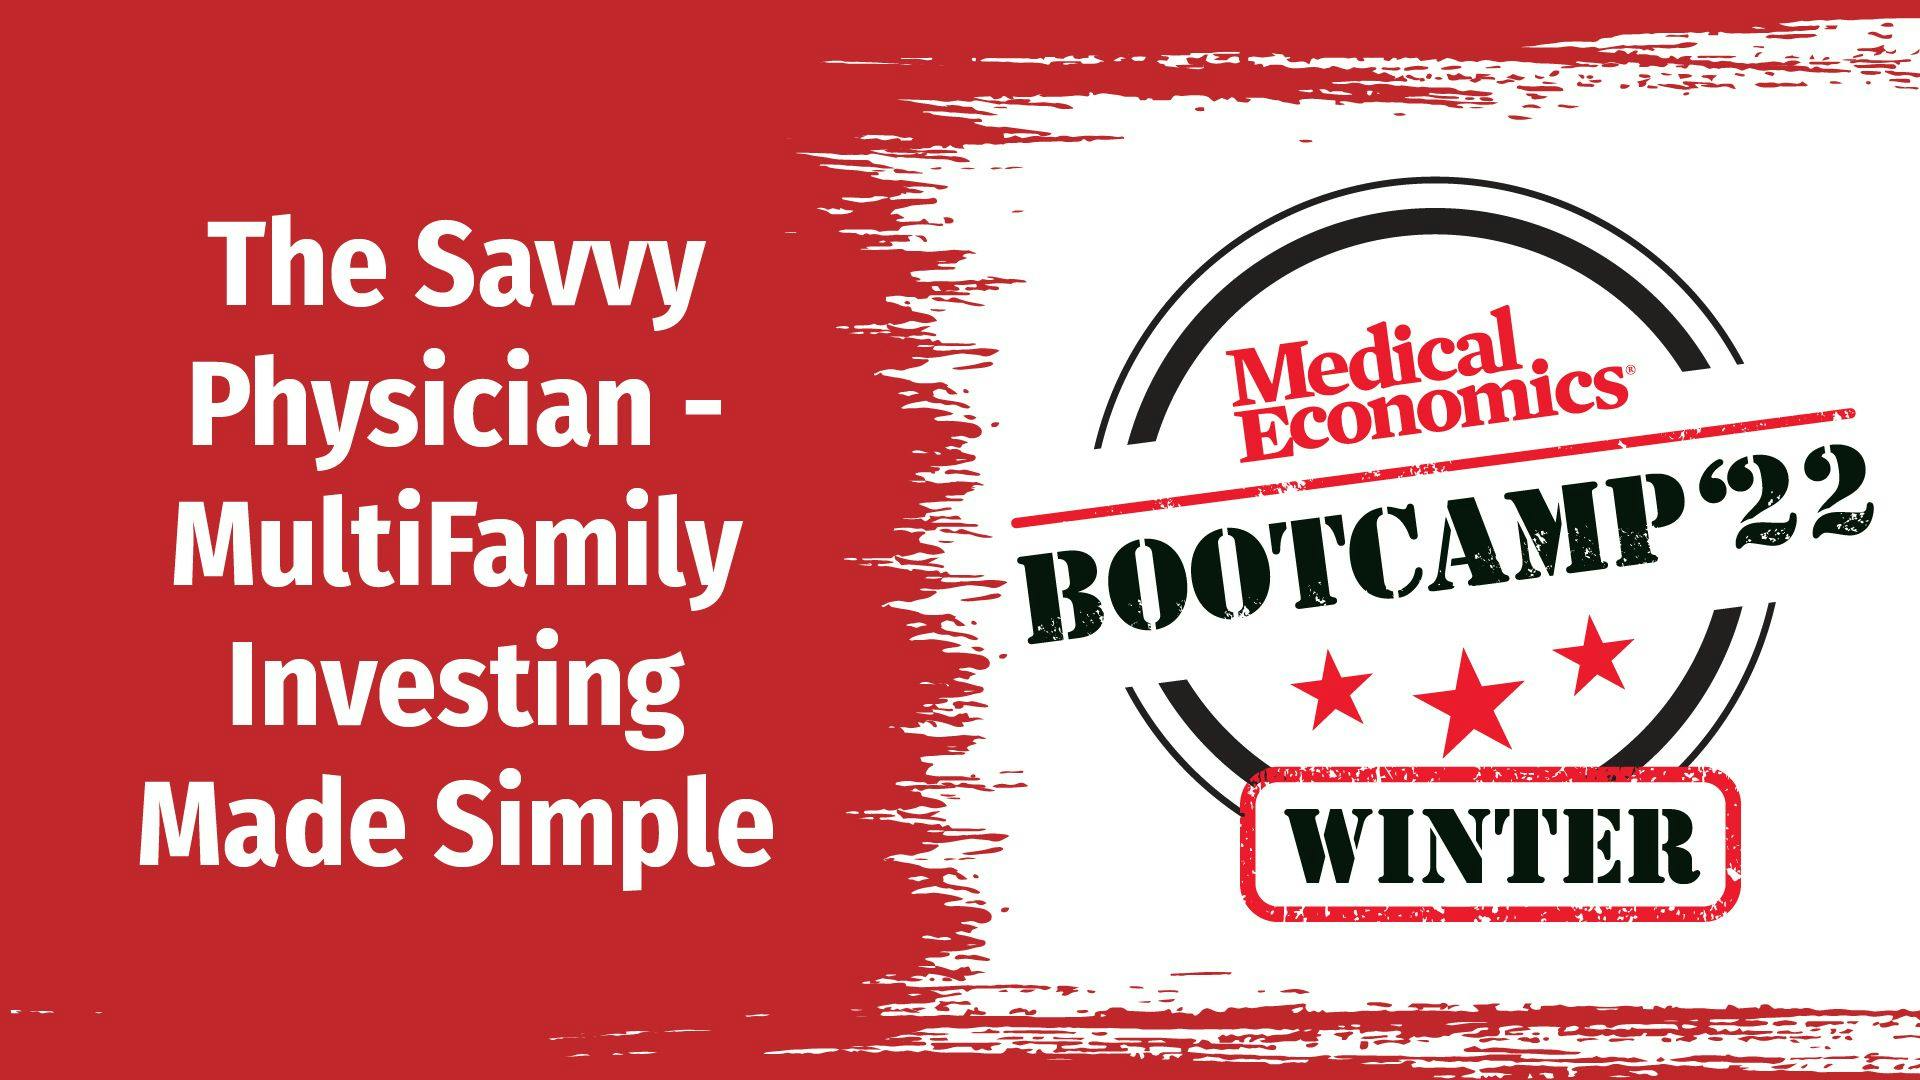 The savvy physician: Multifamily investing made simple